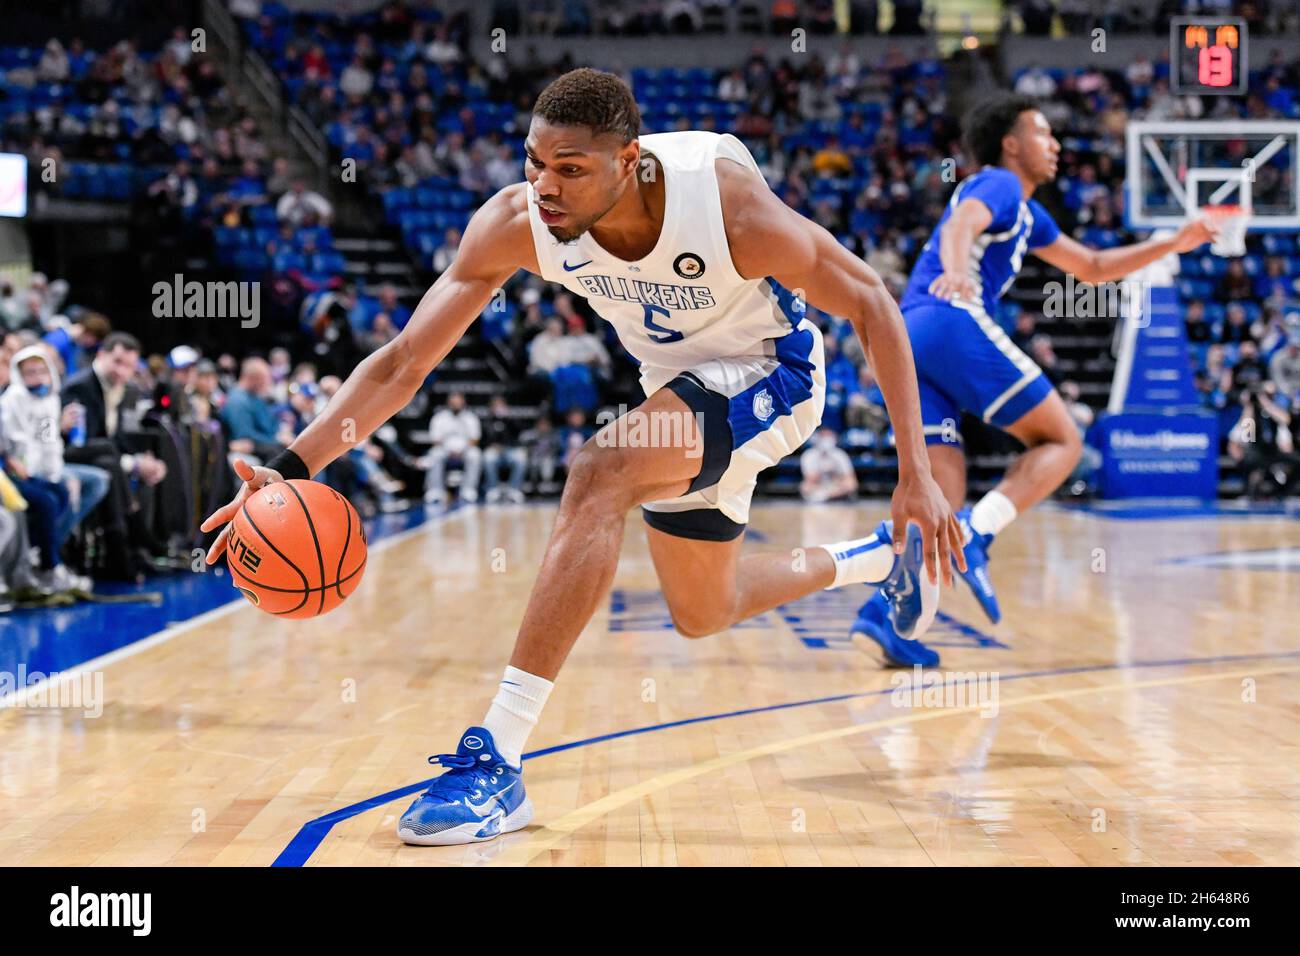 St. Louis, USA. 12th Nov, 2021. November 12, 2021: Saint Louis Billikens forward Francis Okoro (5) grabs a loose ball in a game where the Eastern Illinois Panthers visited the St. Louis Billikens. Held at Chaifetz Arena in St. Louis, MO Richard Ulreich/CSM Credit: Cal Sport Media/Alamy Live News Stock Photo